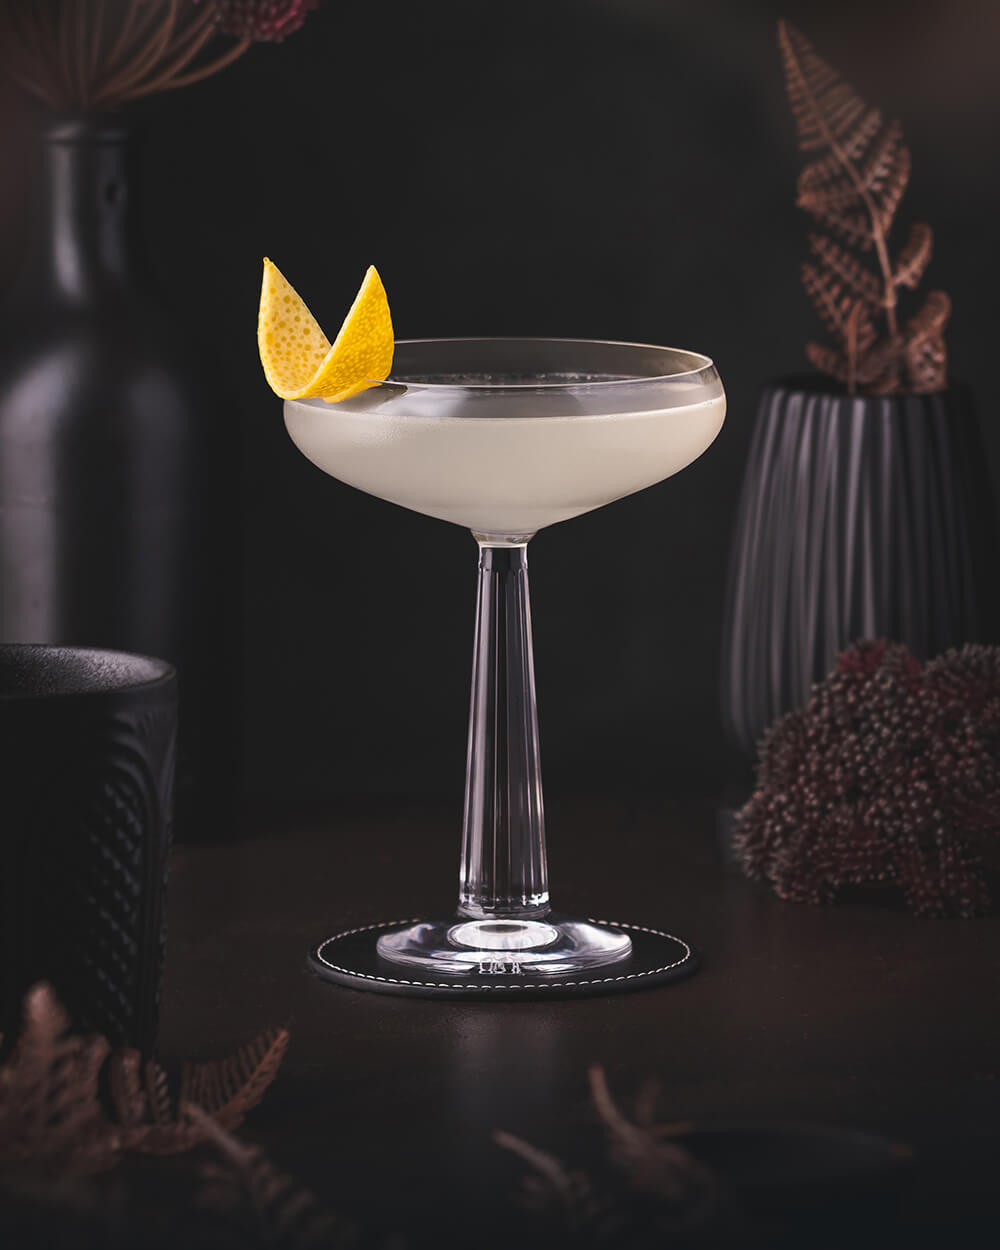 20th Century Cocktail - Gin classic with lemon twist with creme de cacao and white wine aperitif.